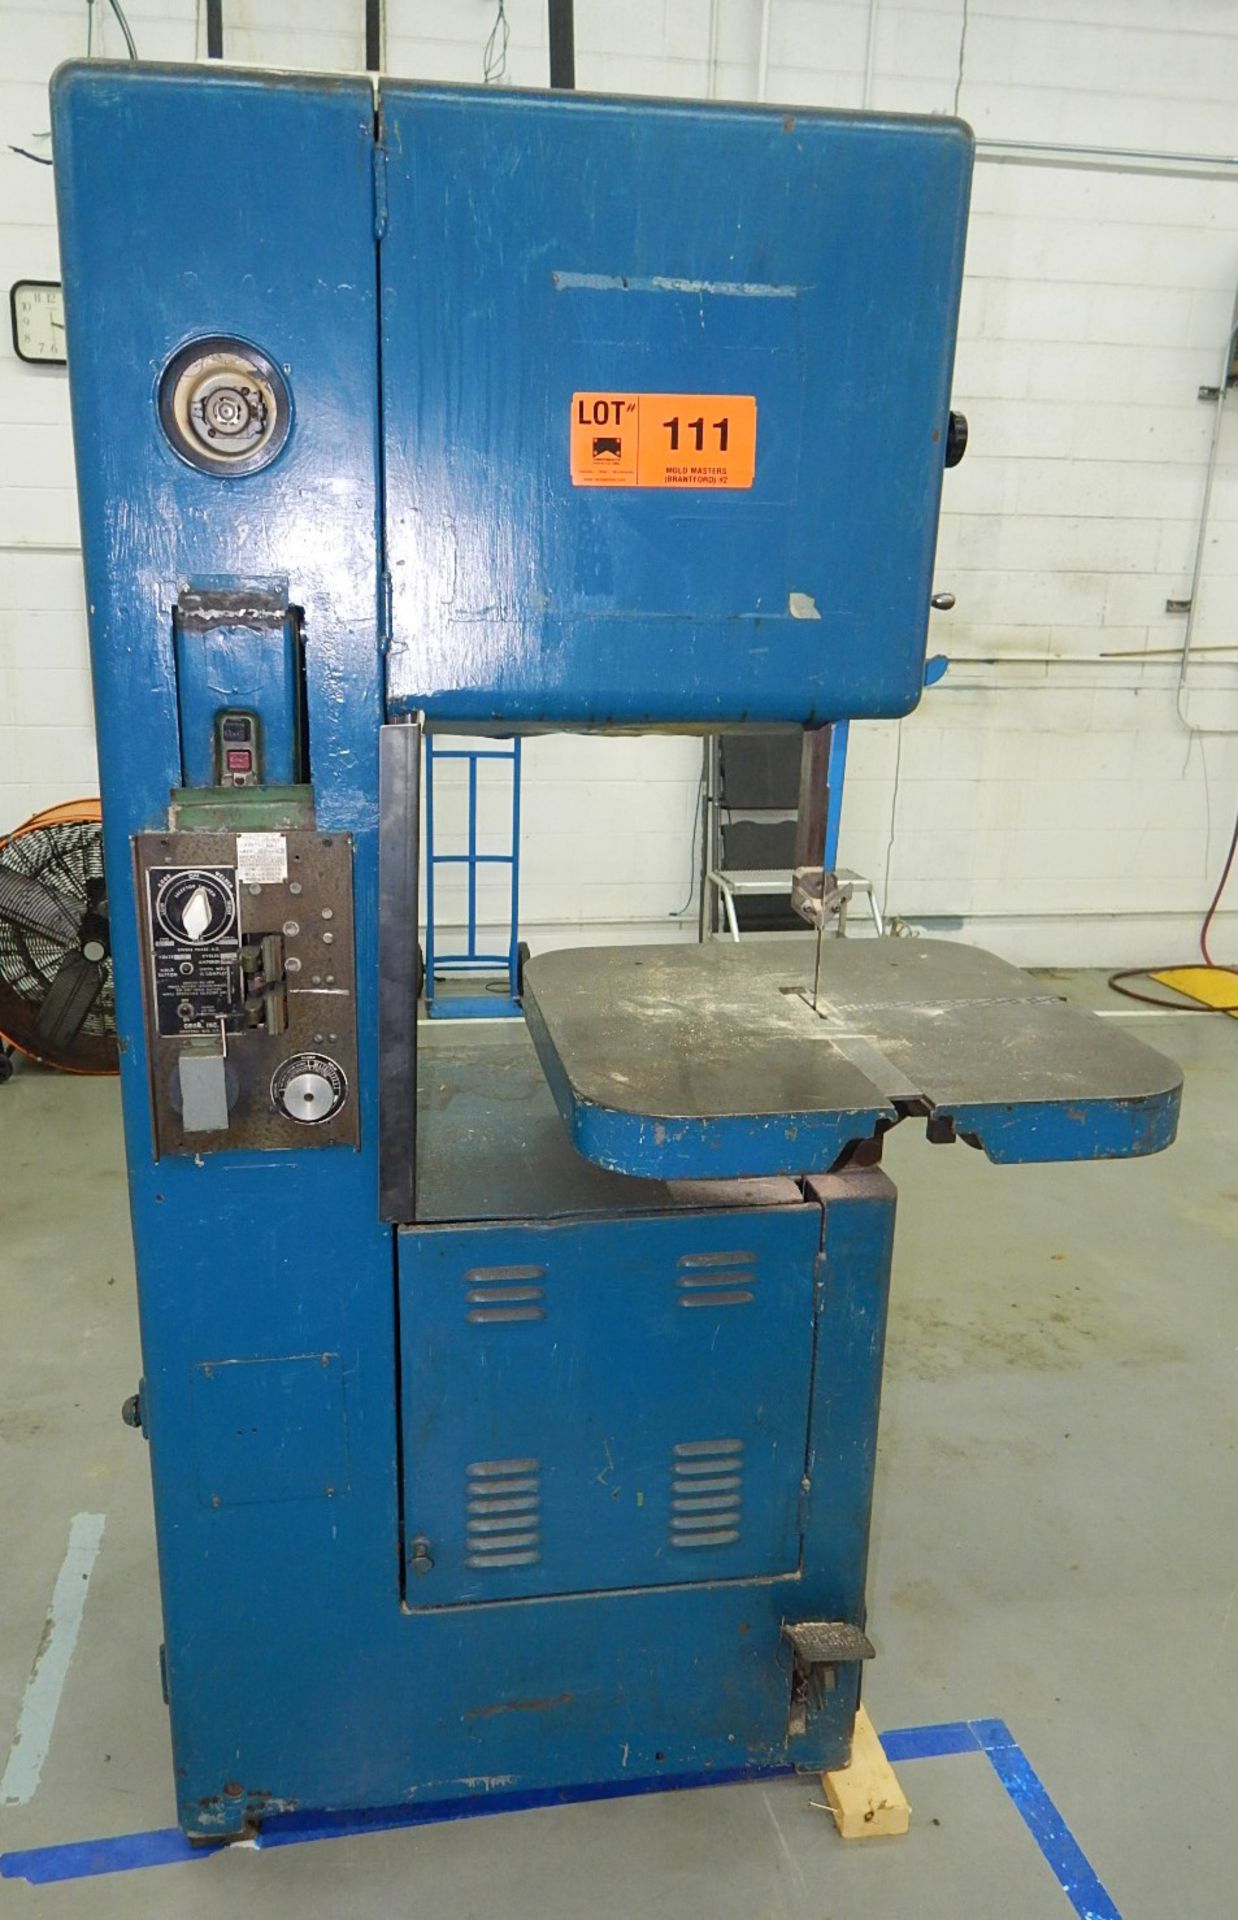 GORB VERTICAL BANDSAW WITH BLADE WELDER AND GRINDER, S/N: N/A [RIGGING FEE FOR LOT 111 - $100